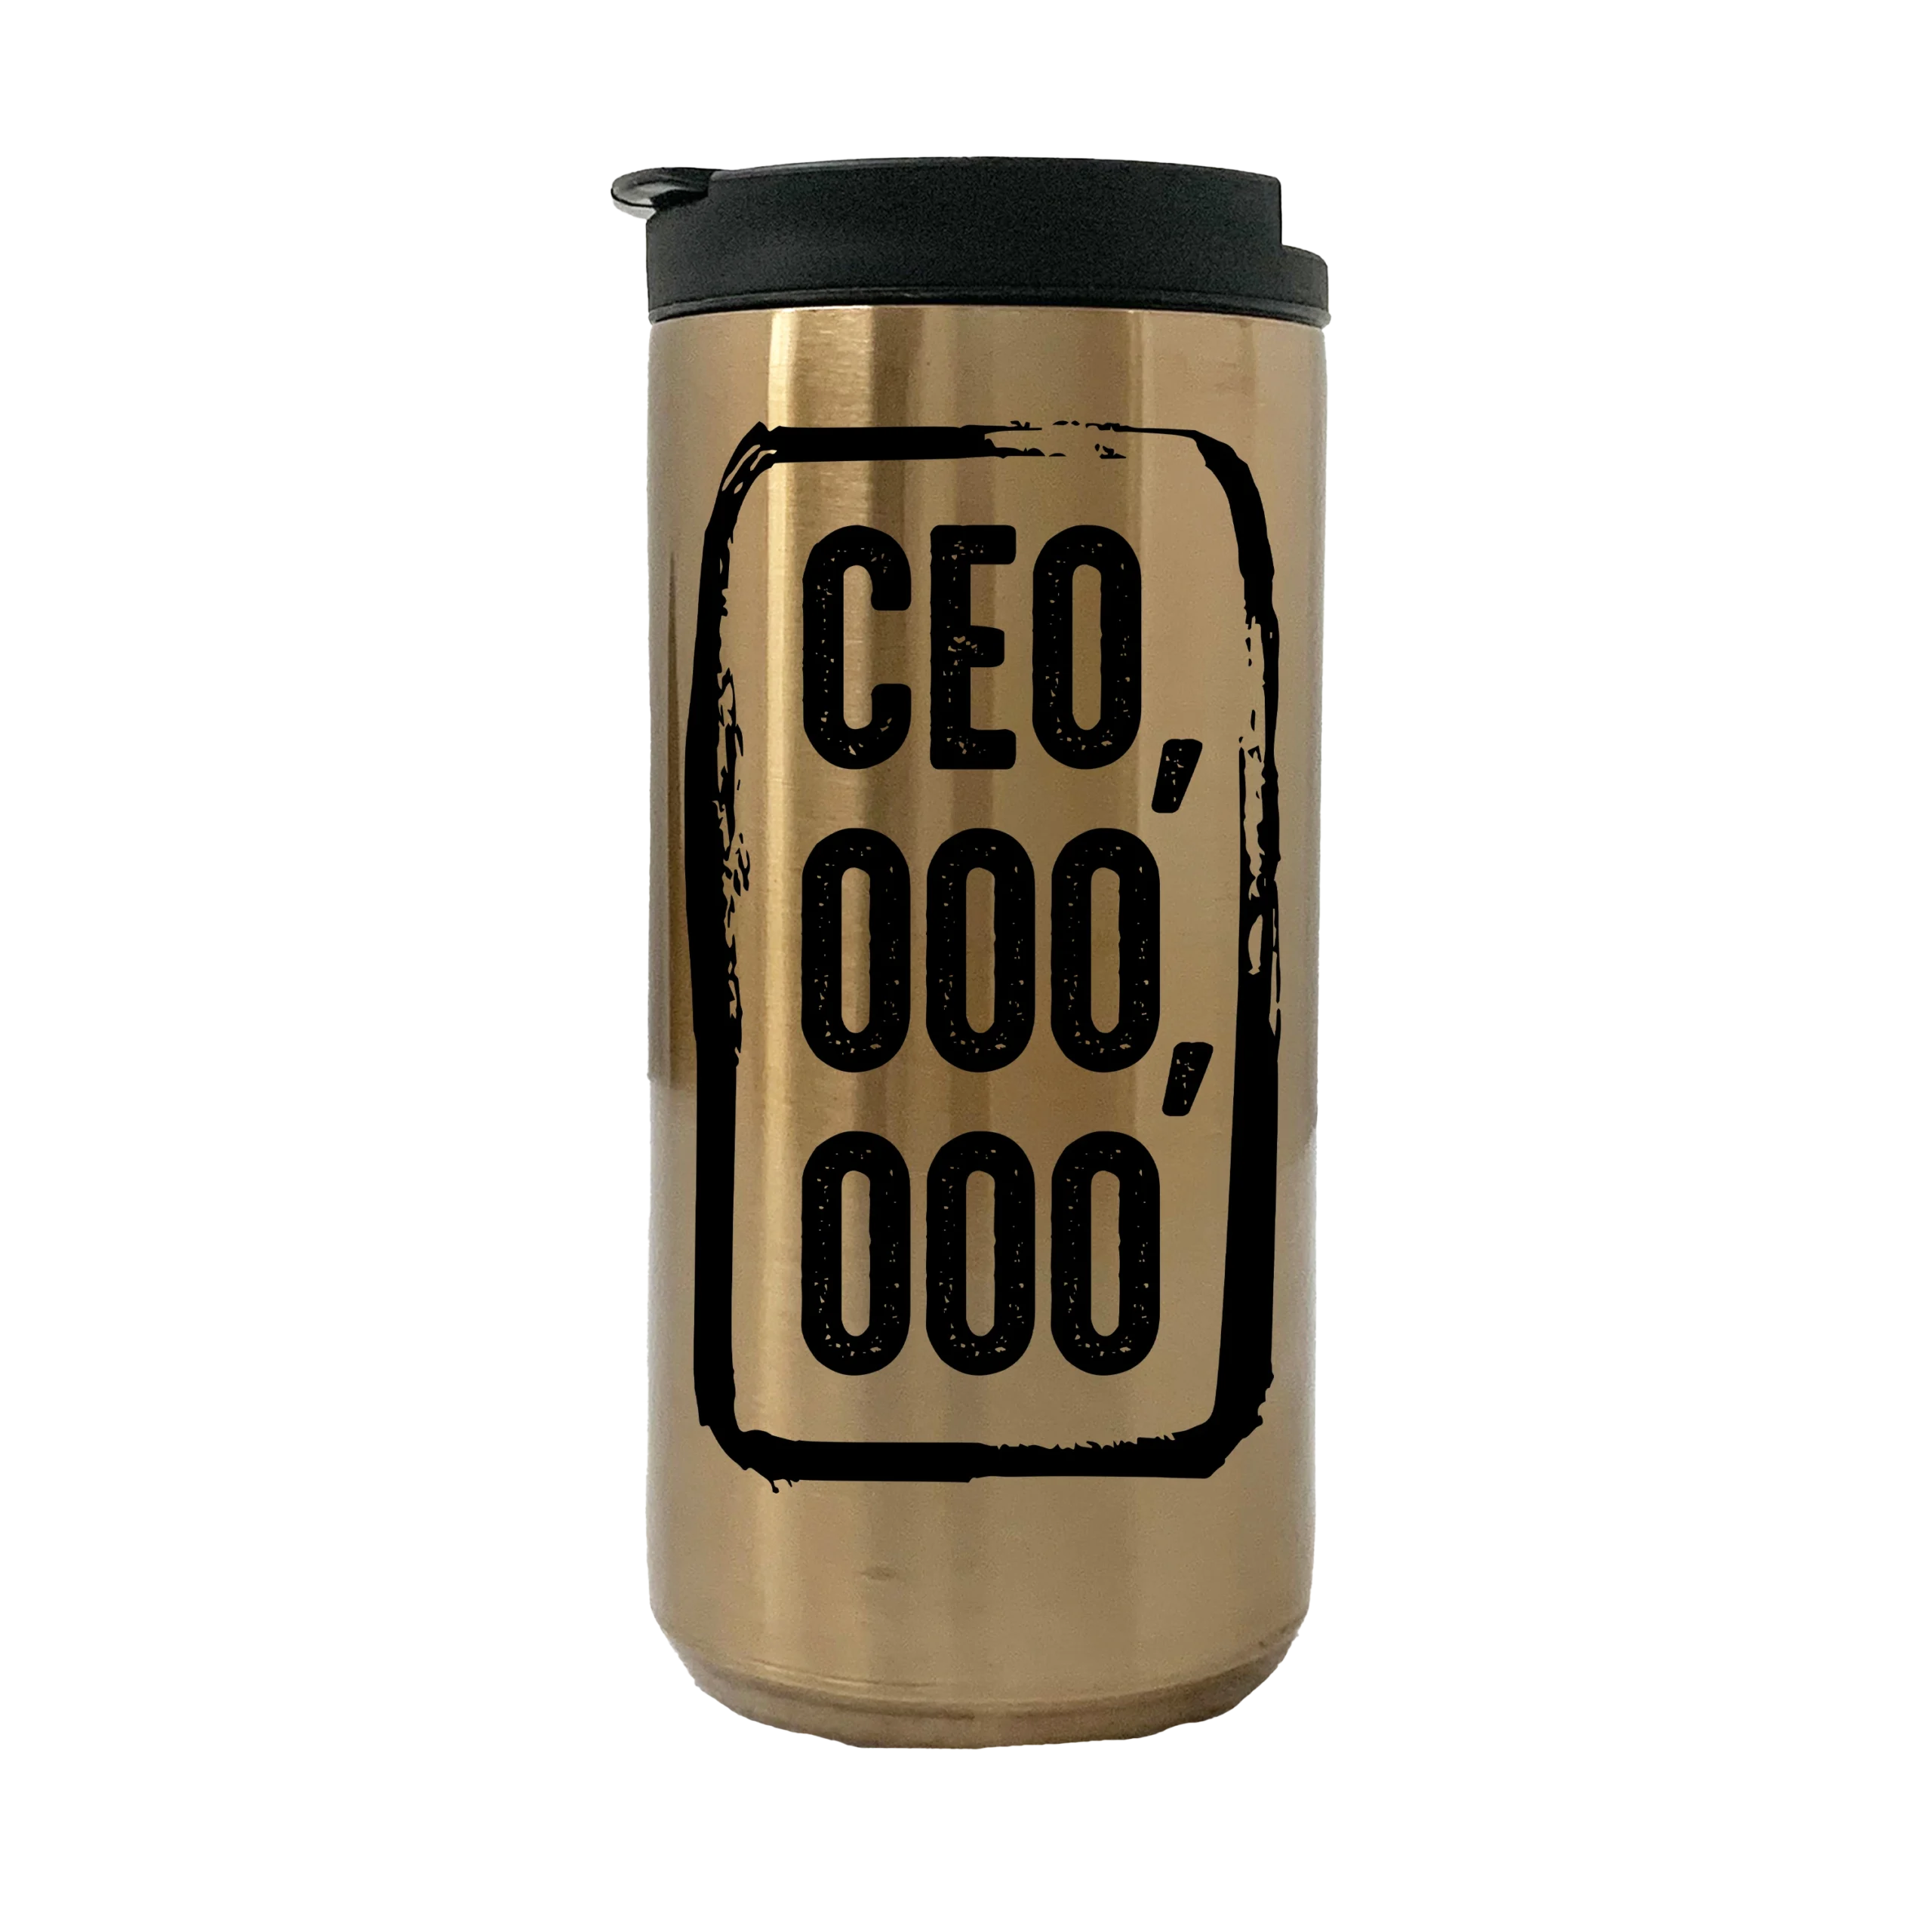 https://theceocreative.com/wp-content/uploads/2023/03/CEO-000-000-14oz-coffee-tumbler-gold-scaled.webp